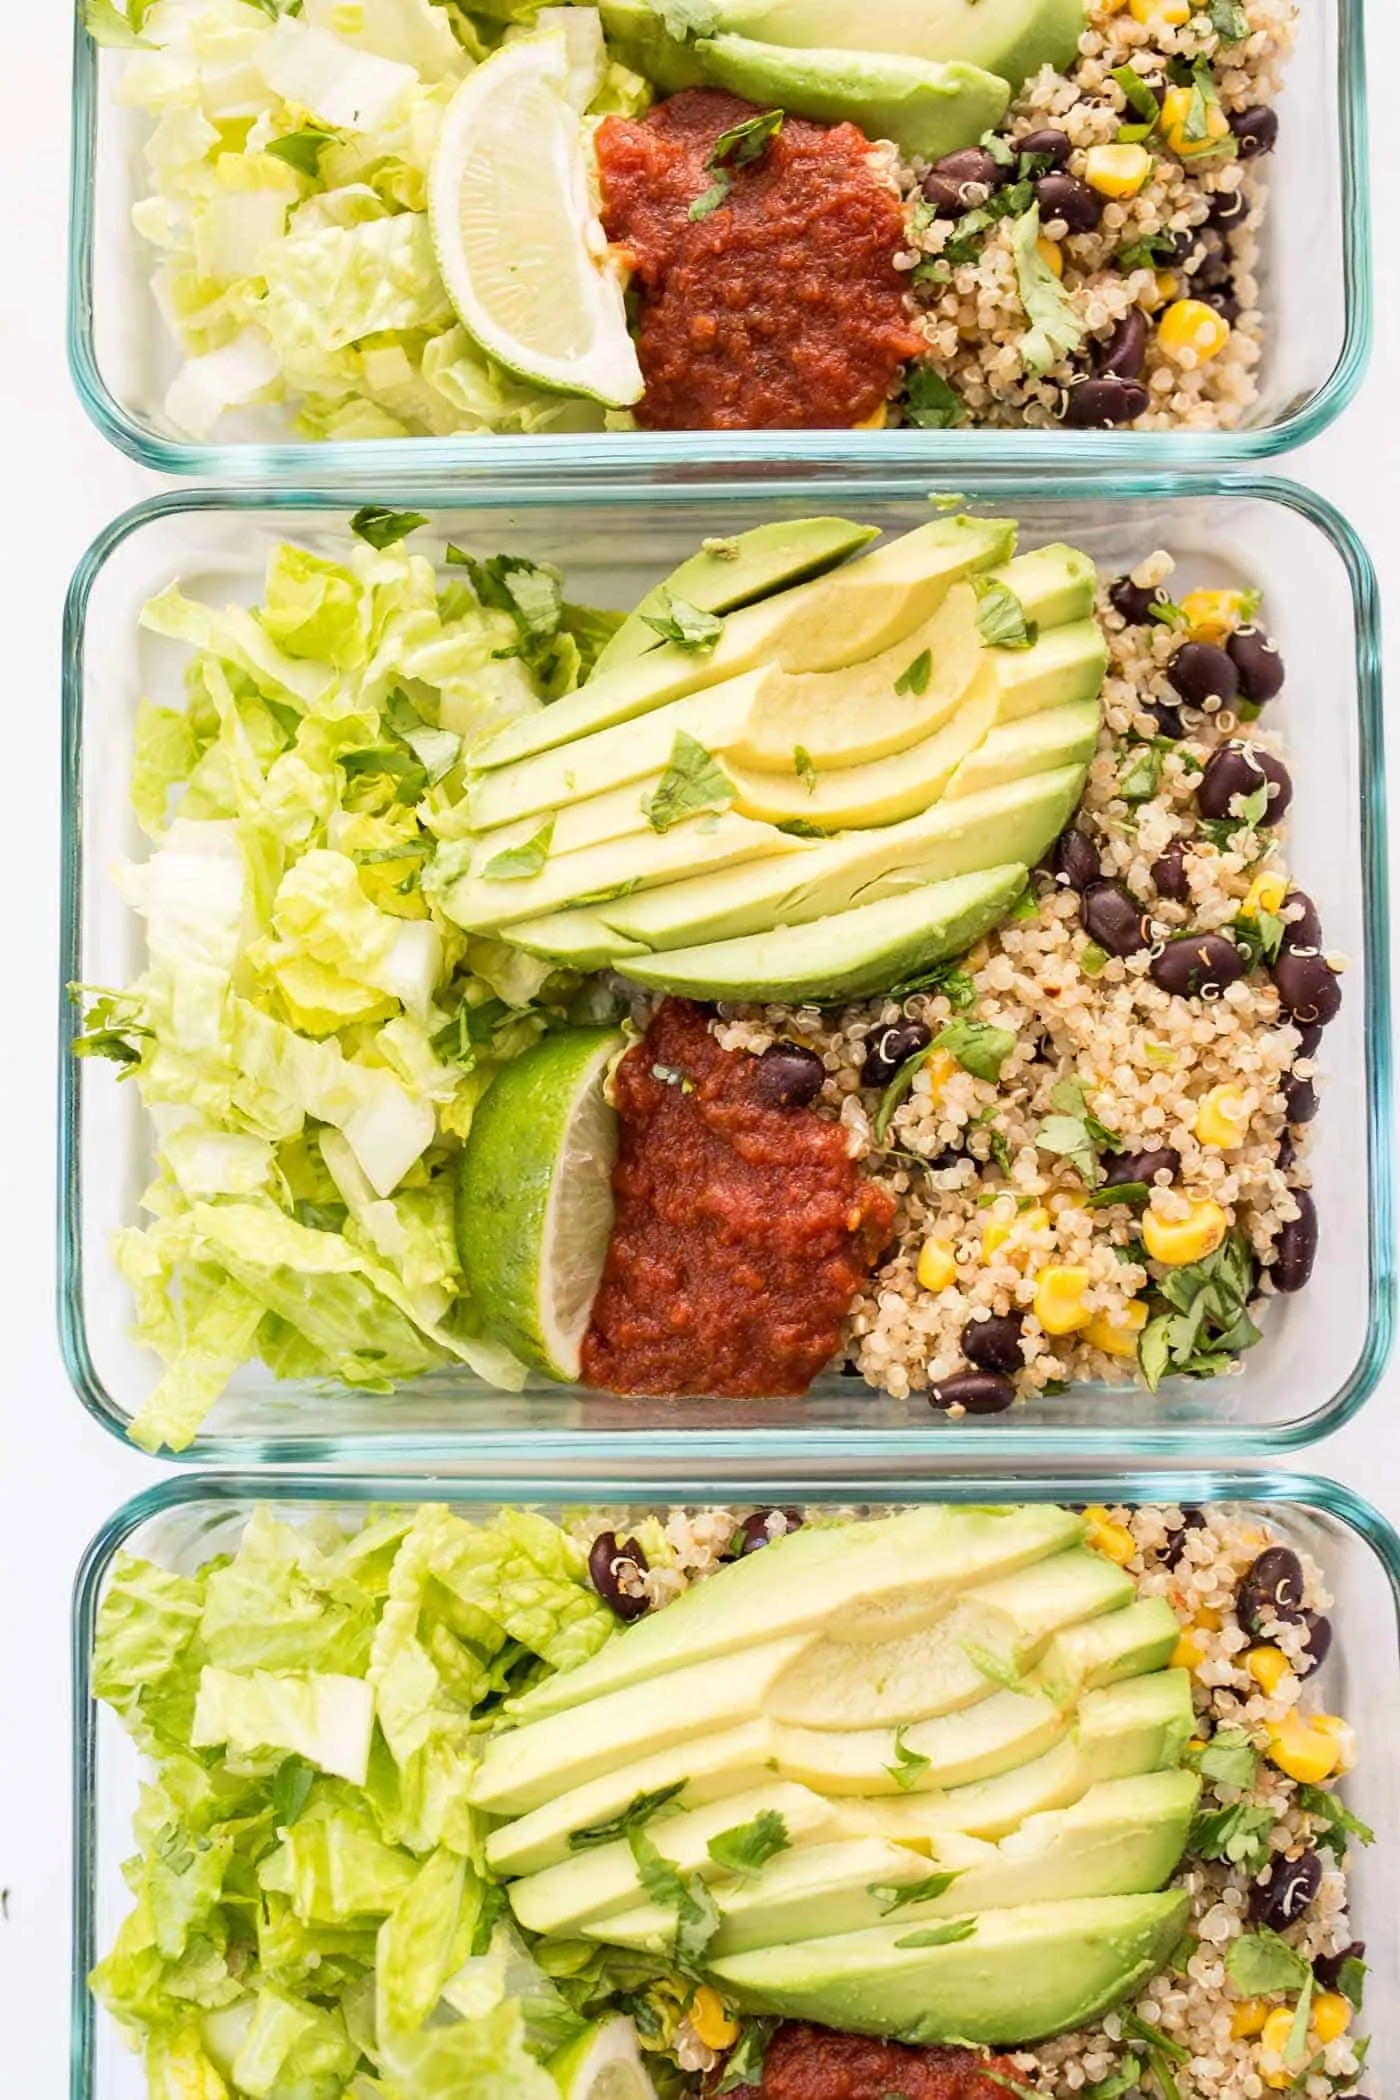 Meal Prep with these simple vegetarian quinoa burrito bowls -- recipe makes 5 FULL MEALS!